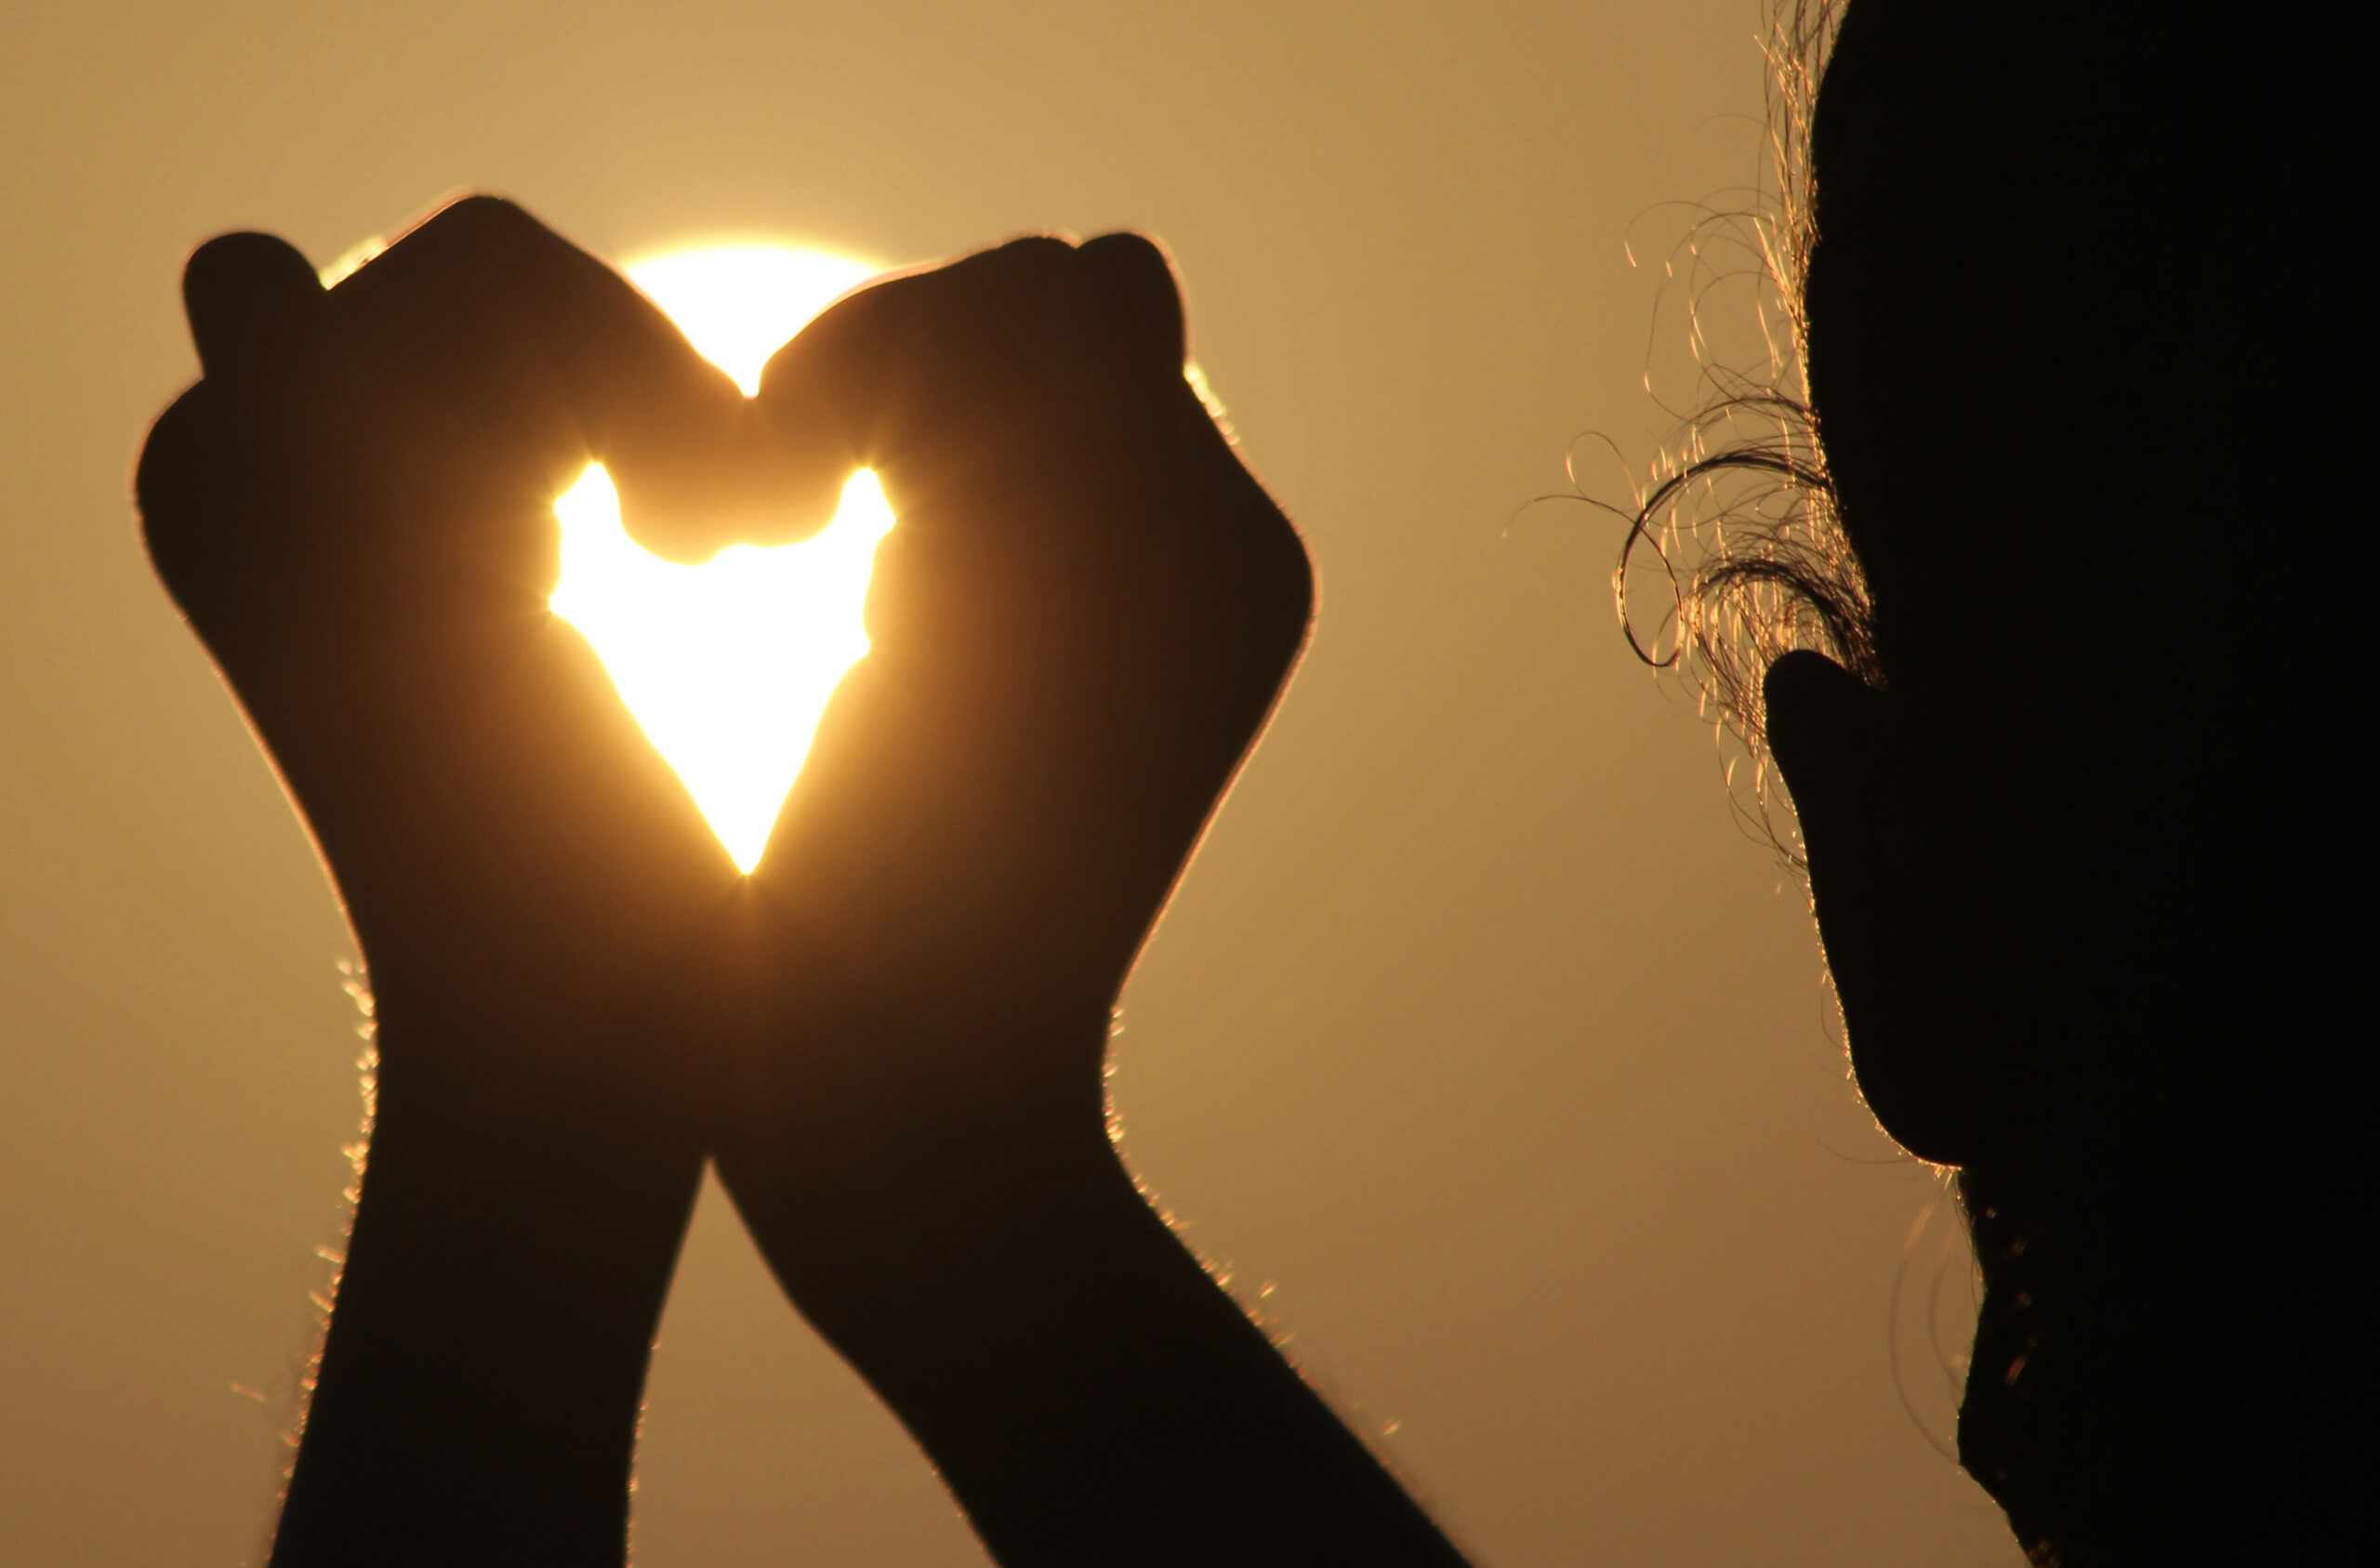 Women are more prone to broken heart syndrome